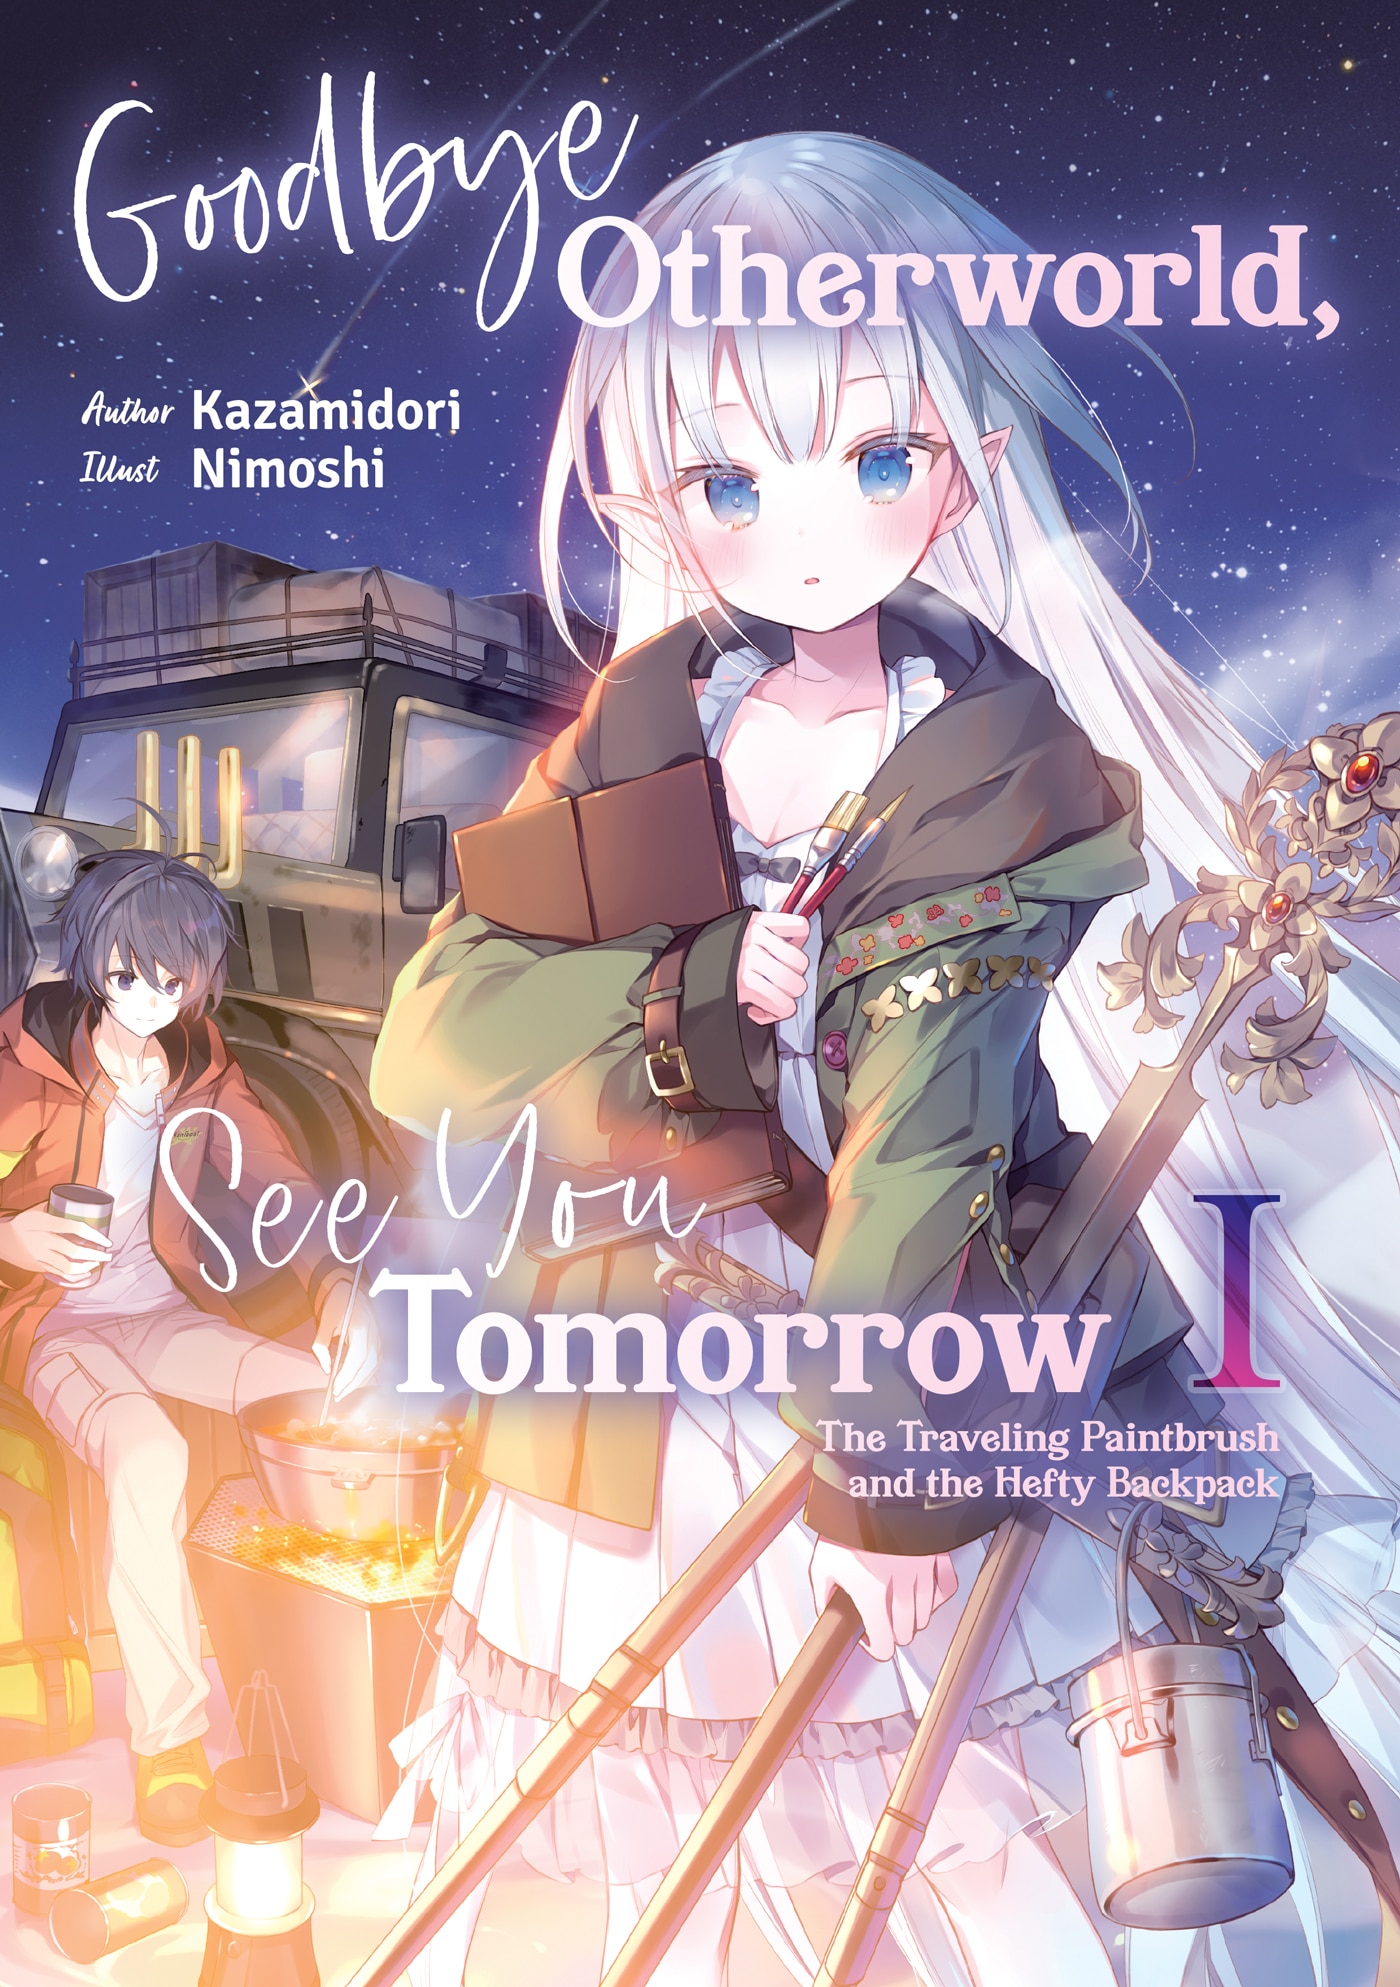 J-Novel Club Reveals Five New Light Novel And Manga Acquisitions Available  Today